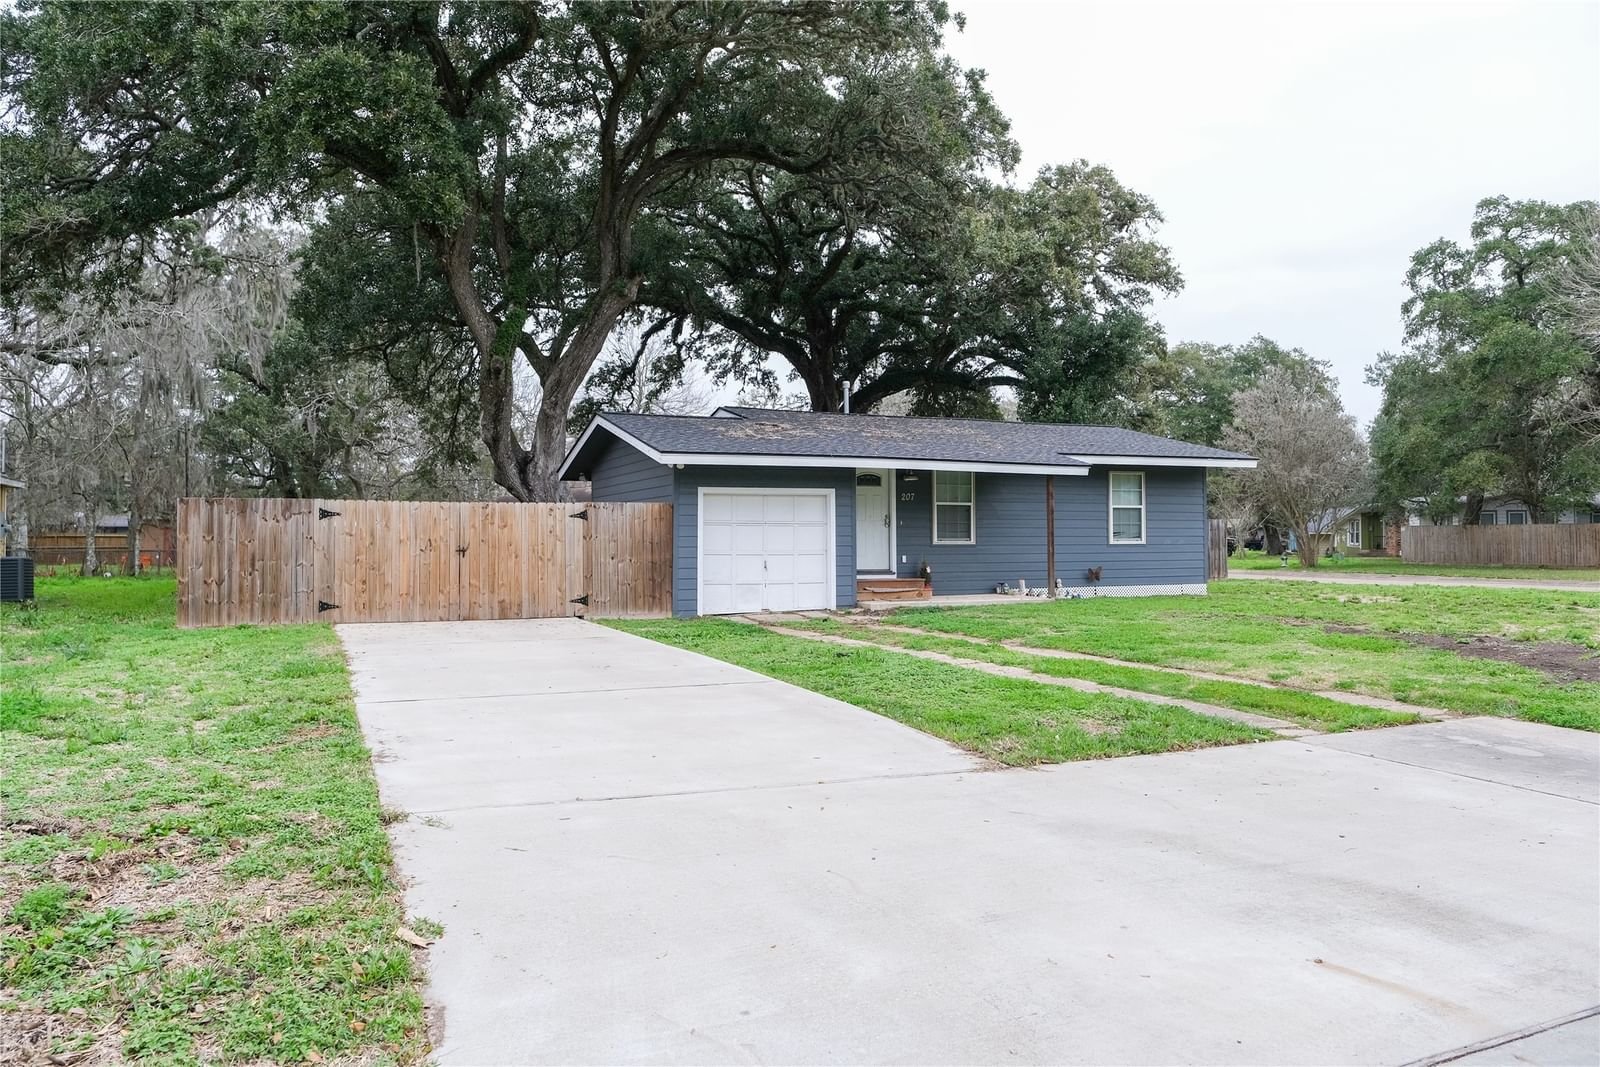 Real estate property located at 207 Jasmine, Brazoria, S5850 - AREA B-C-D-E-G-H-J-K-L ETC (LAK, Lake Jackson, TX, US